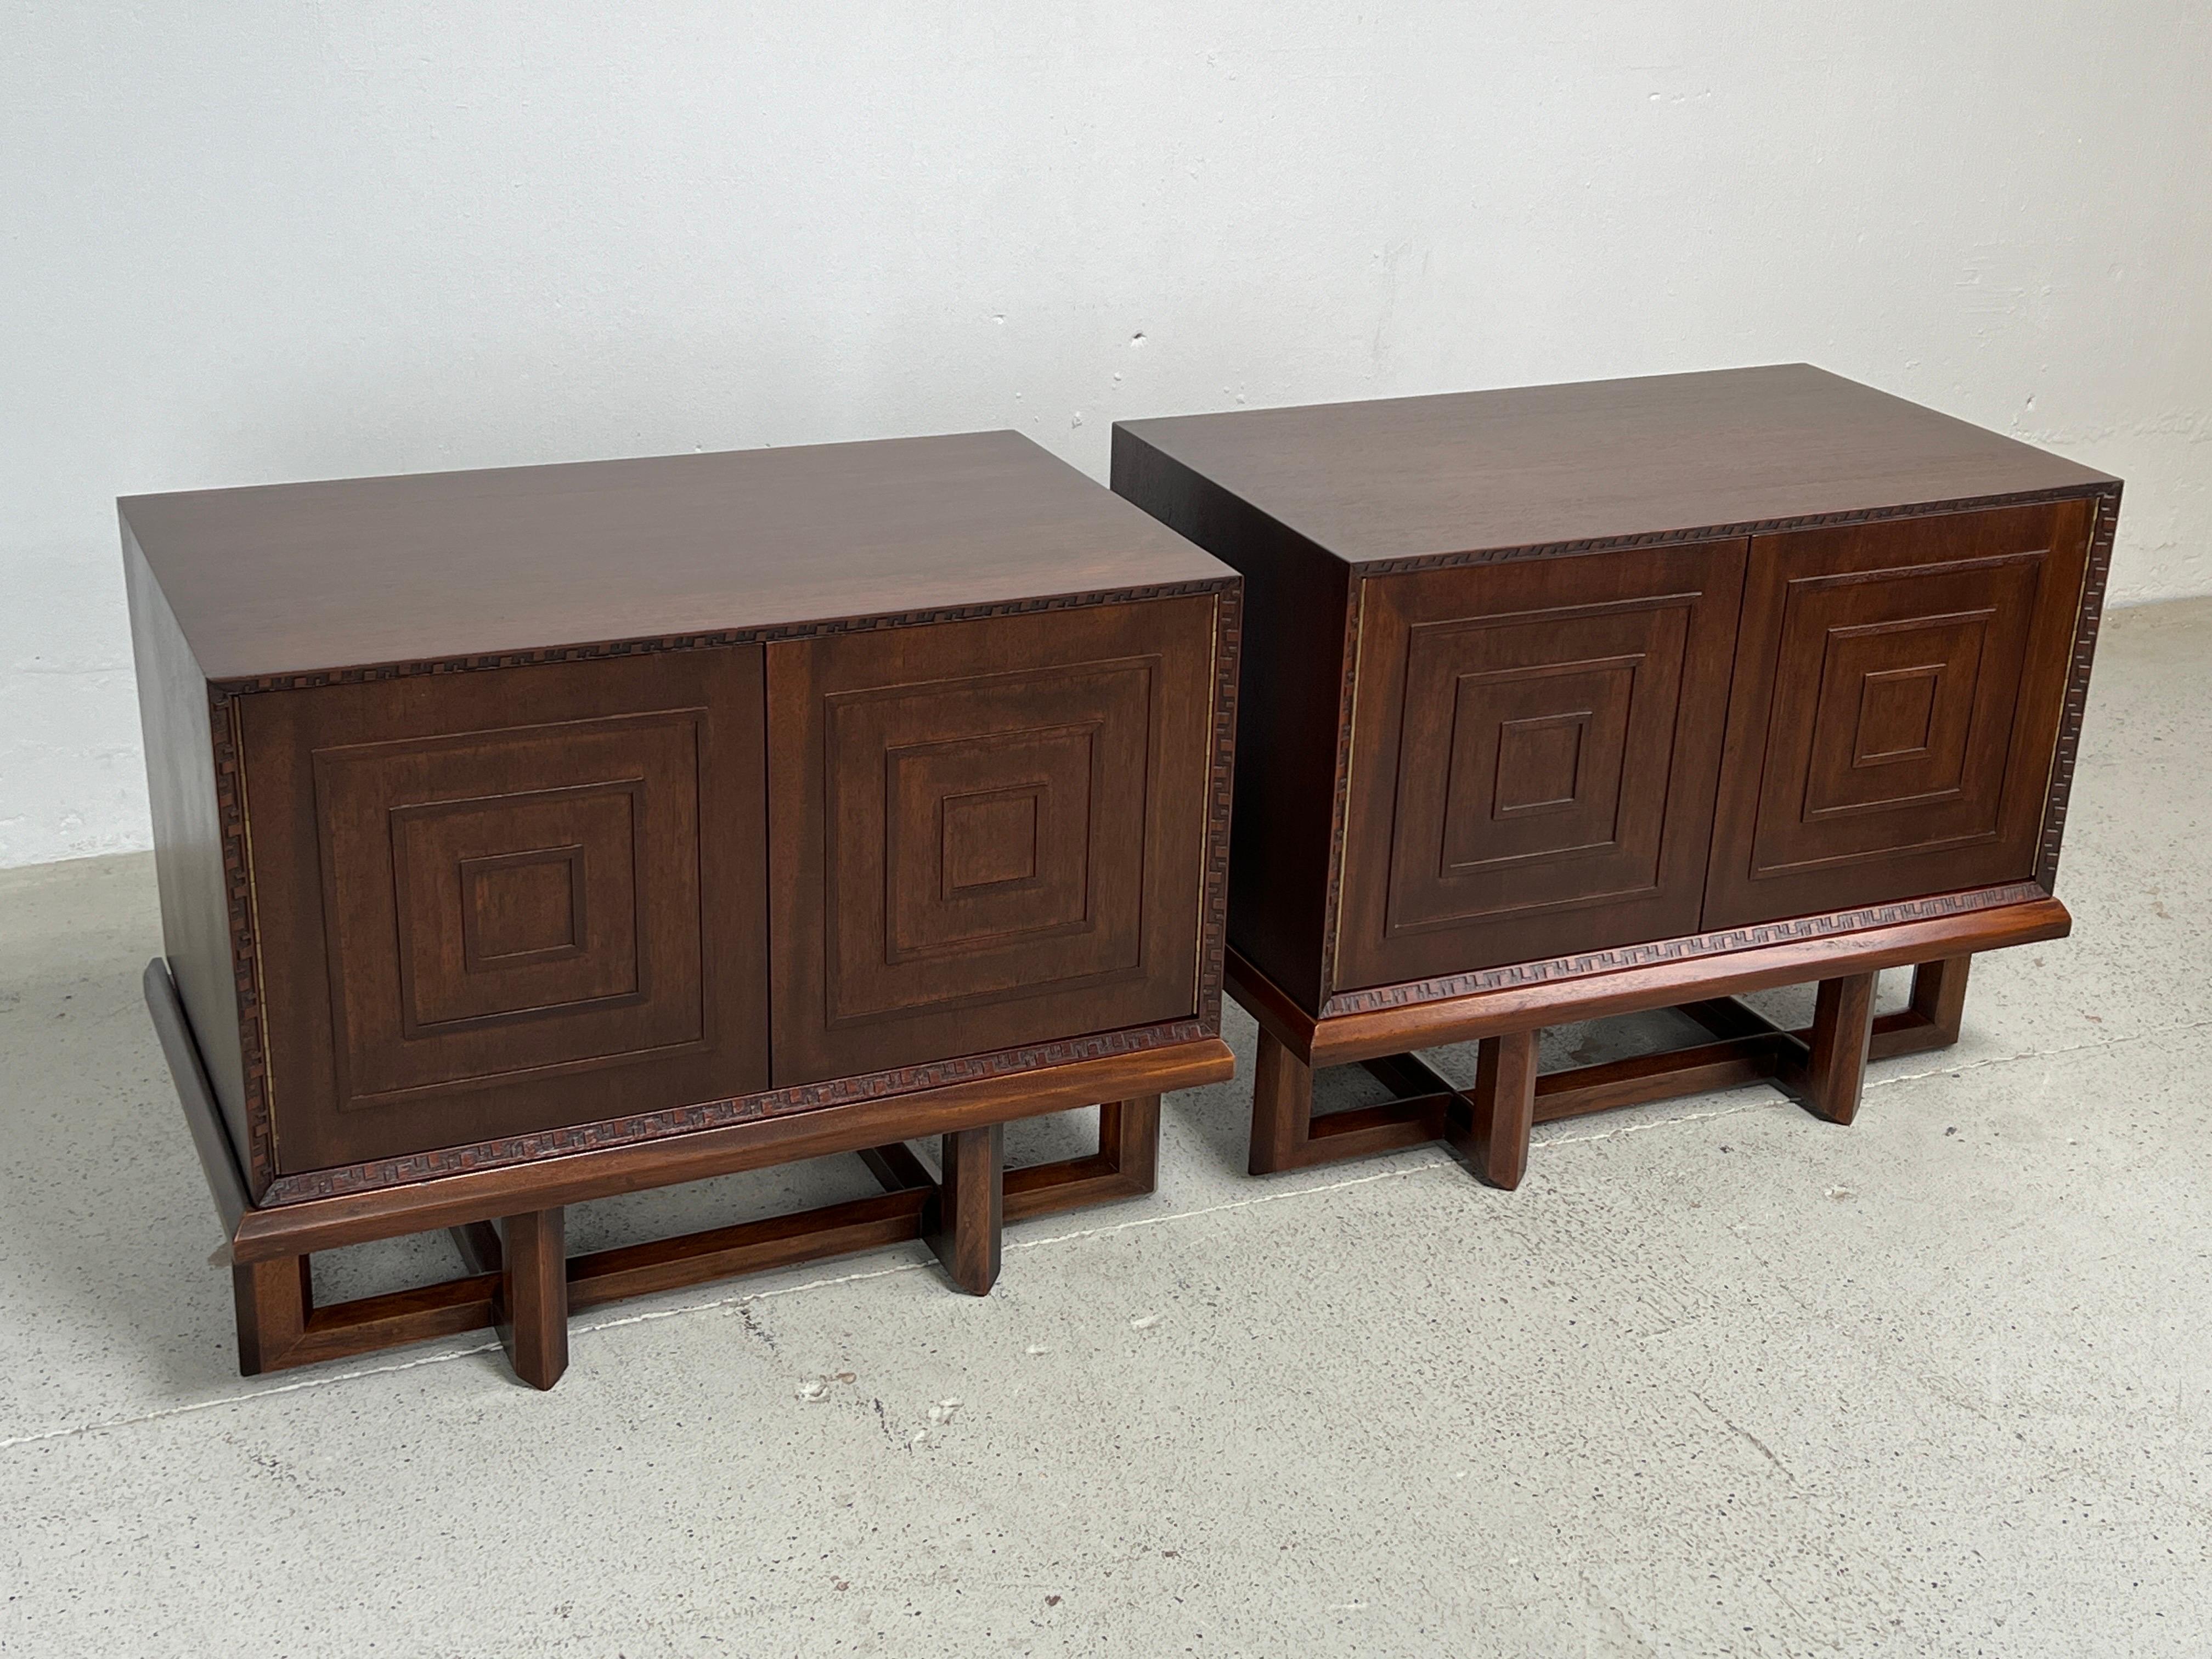 Mahogany Pair of Cabinets / Nightstands by Frank Lloyd Wright for Henredon